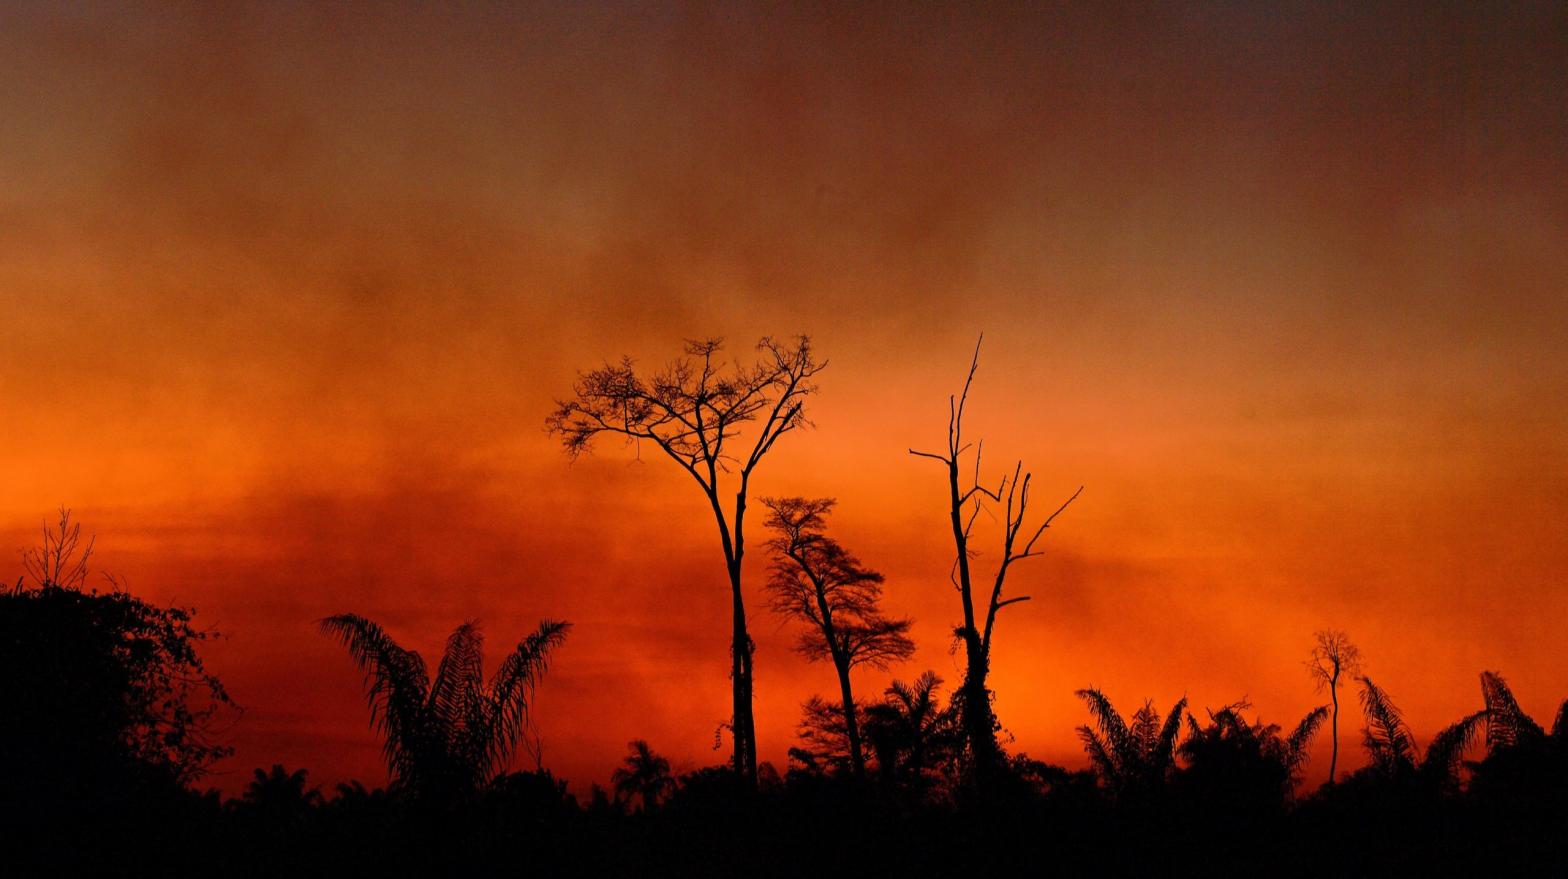 Smoke rises from a burnt area of land a the Xingu Indigenous Park, Mato Grosso state, Brazil, in the Amazon basin, on August 6, 2020. (Photo: Carl De Souza, Getty Images)